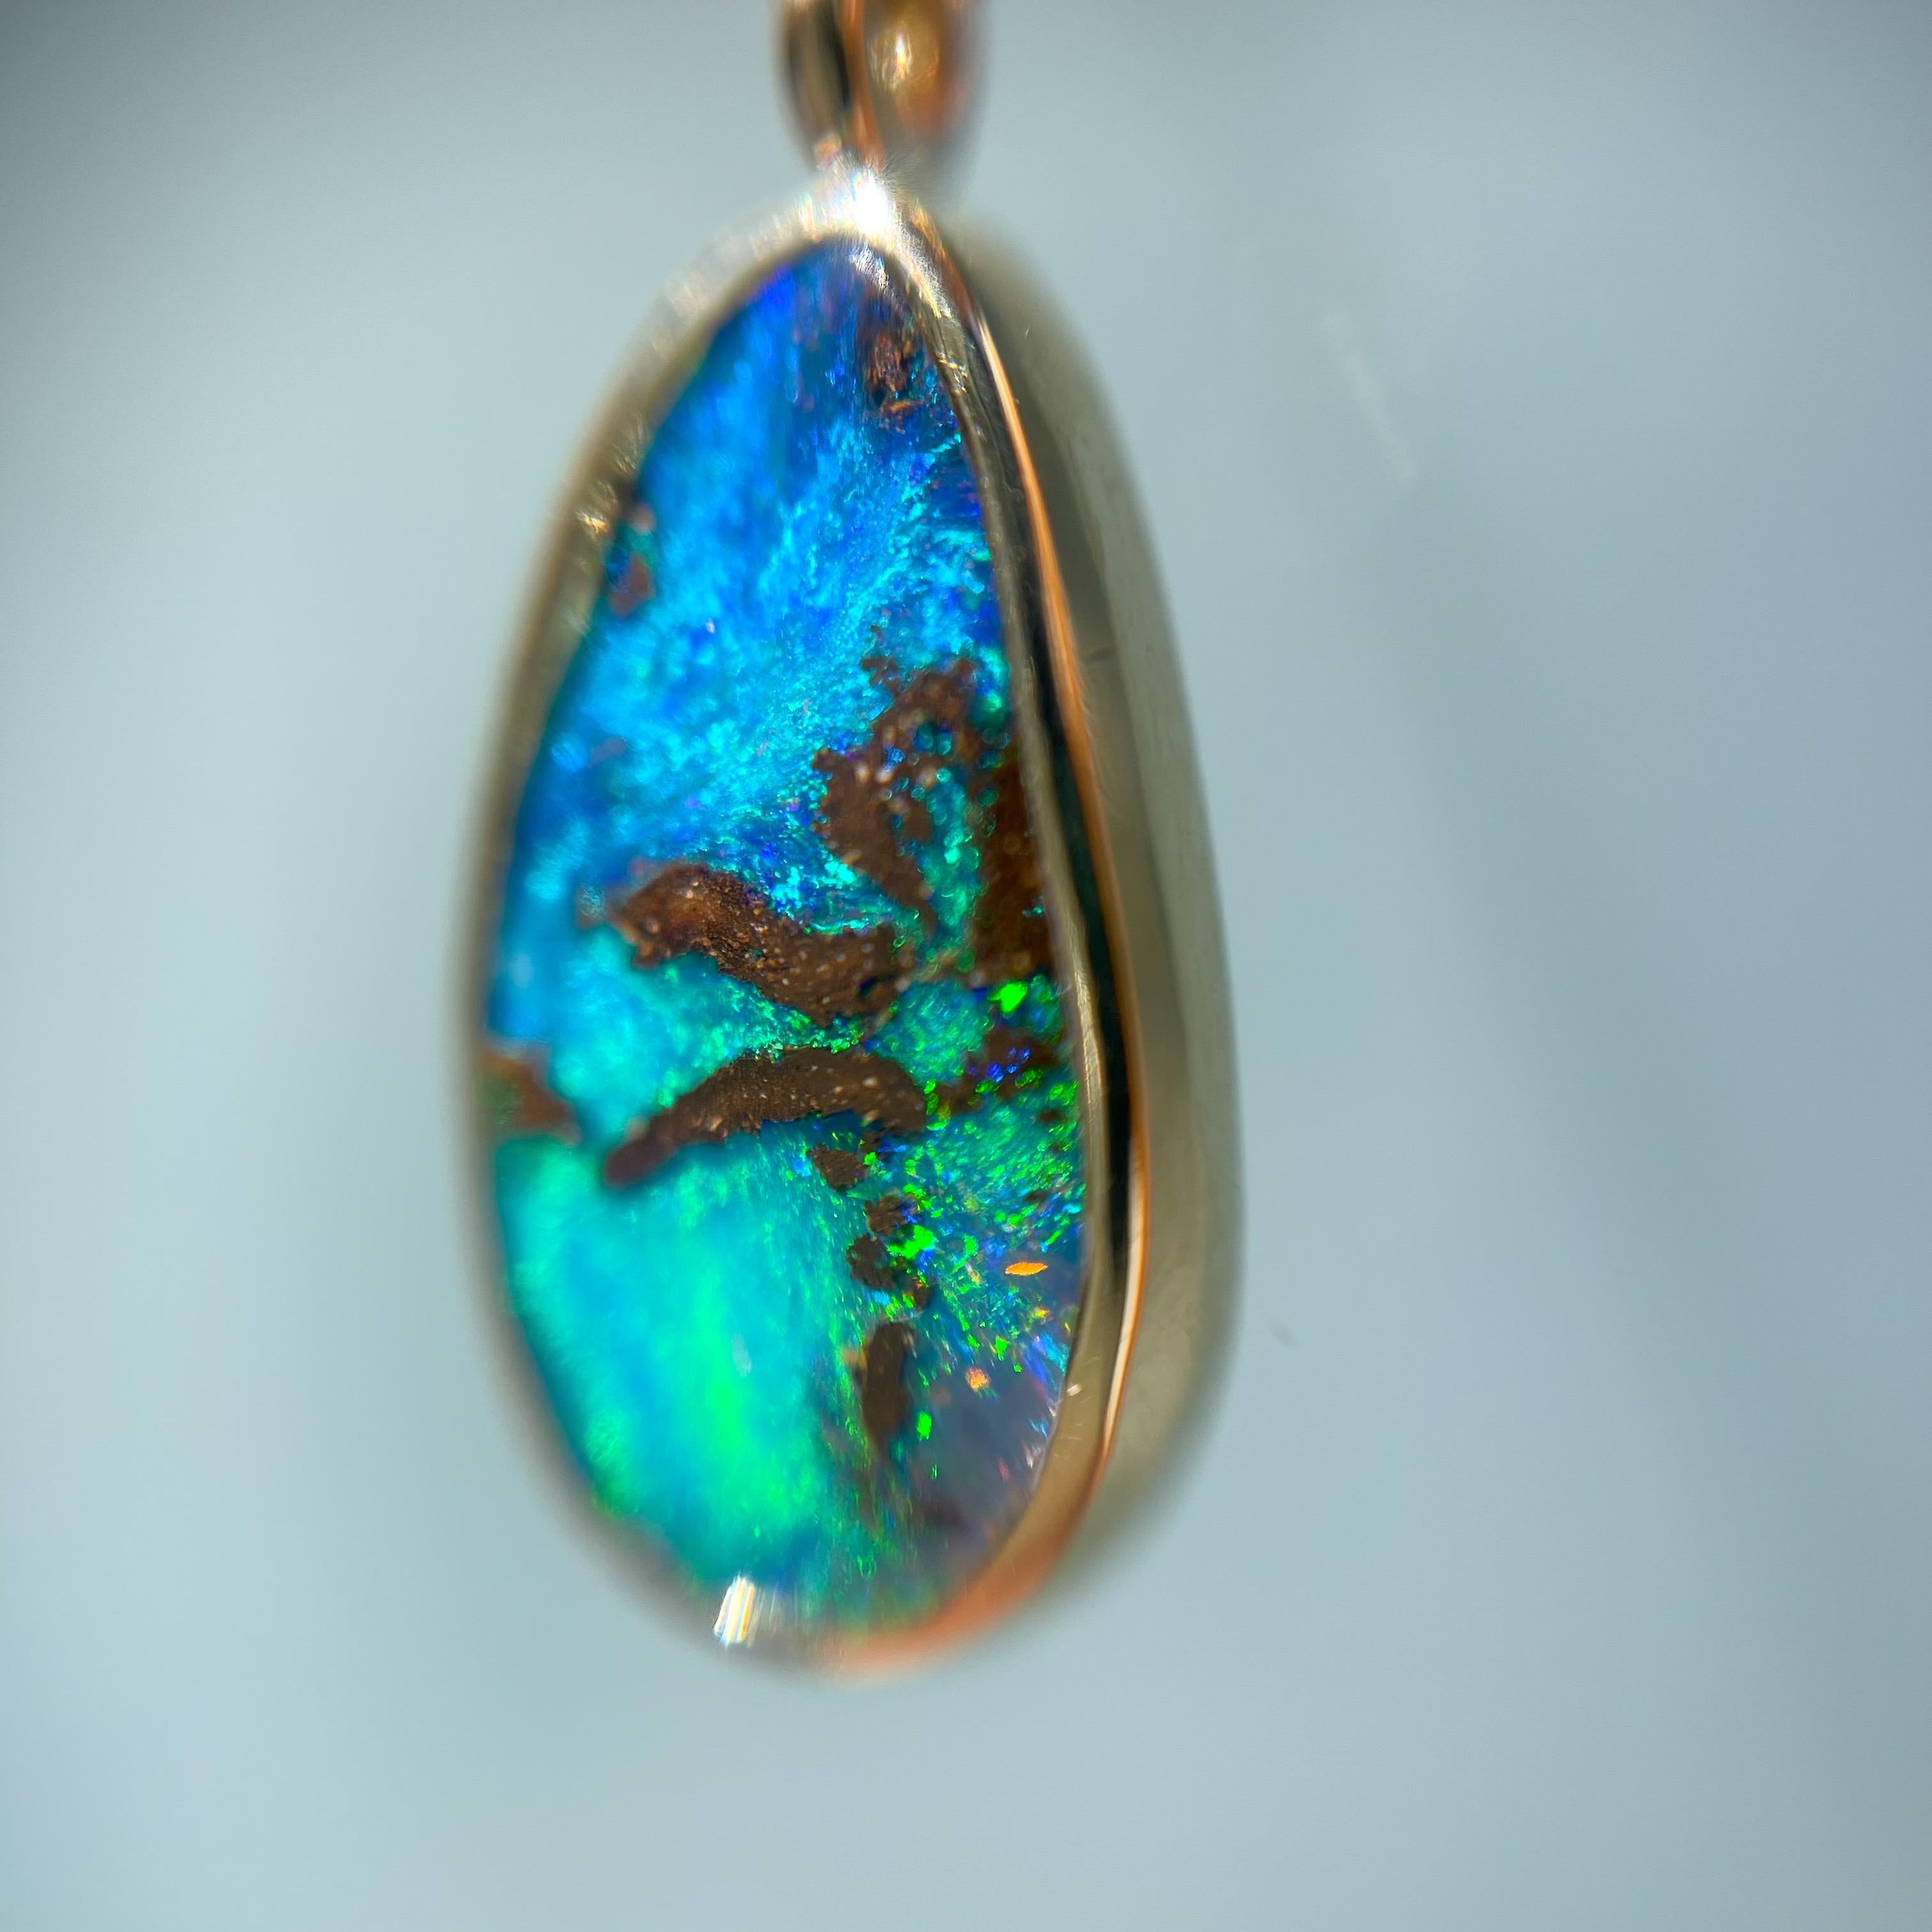 NIXIN Jewelry Unicorn Tear Australian Opal Necklace No. 18 in 14k Gold In New Condition For Sale In Los Angeles, CA